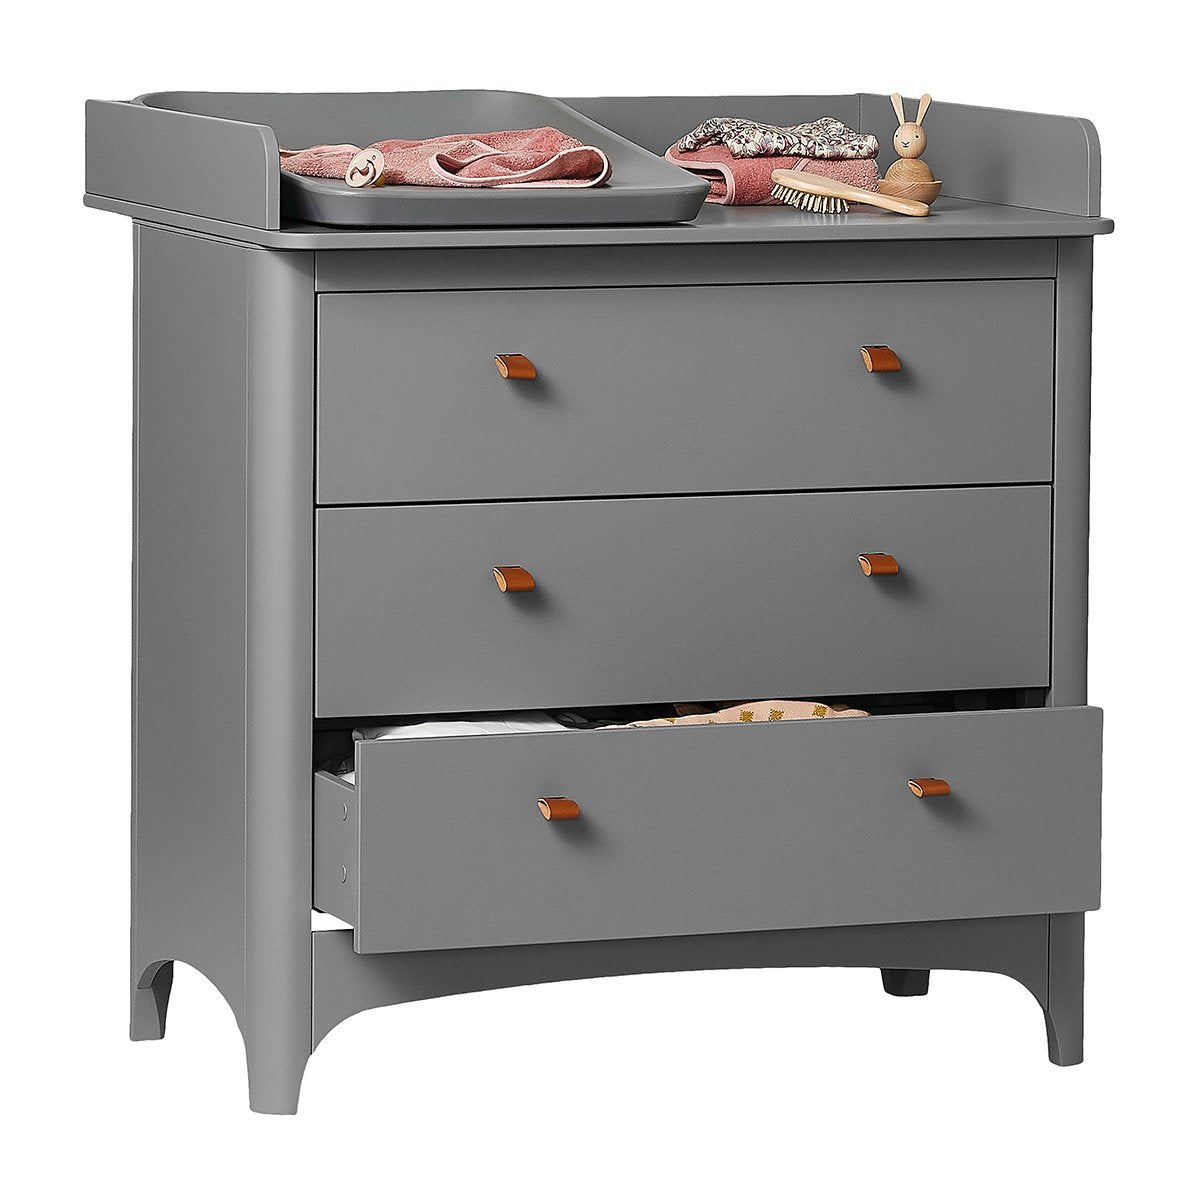 Leander Leander Changing Unit voor Classic Commode Grey - Decomusy